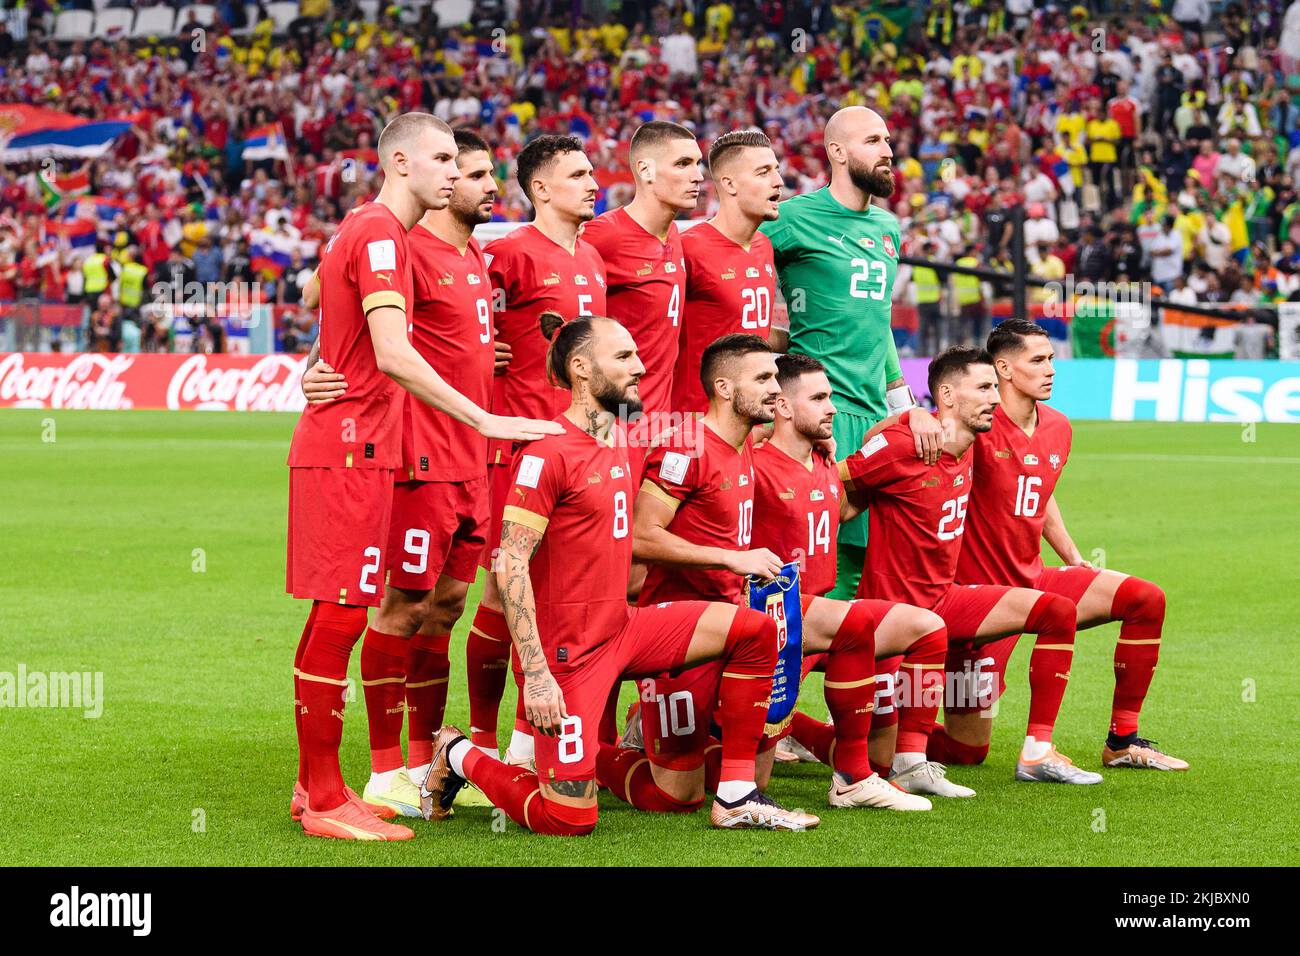 Lusail, Qatar. 24th Nov, 2022. Lusail, Qatar, Nov 25th 2022: Serbia team, before the match between Brazil vs Serbia, valid for the group stage of the World Cup, held at the Lusail National Stadium in Lusail, Qatar. (Marcio Machado/SPP) Credit: SPP Sport Press Photo. /Alamy Live News Stock Photo